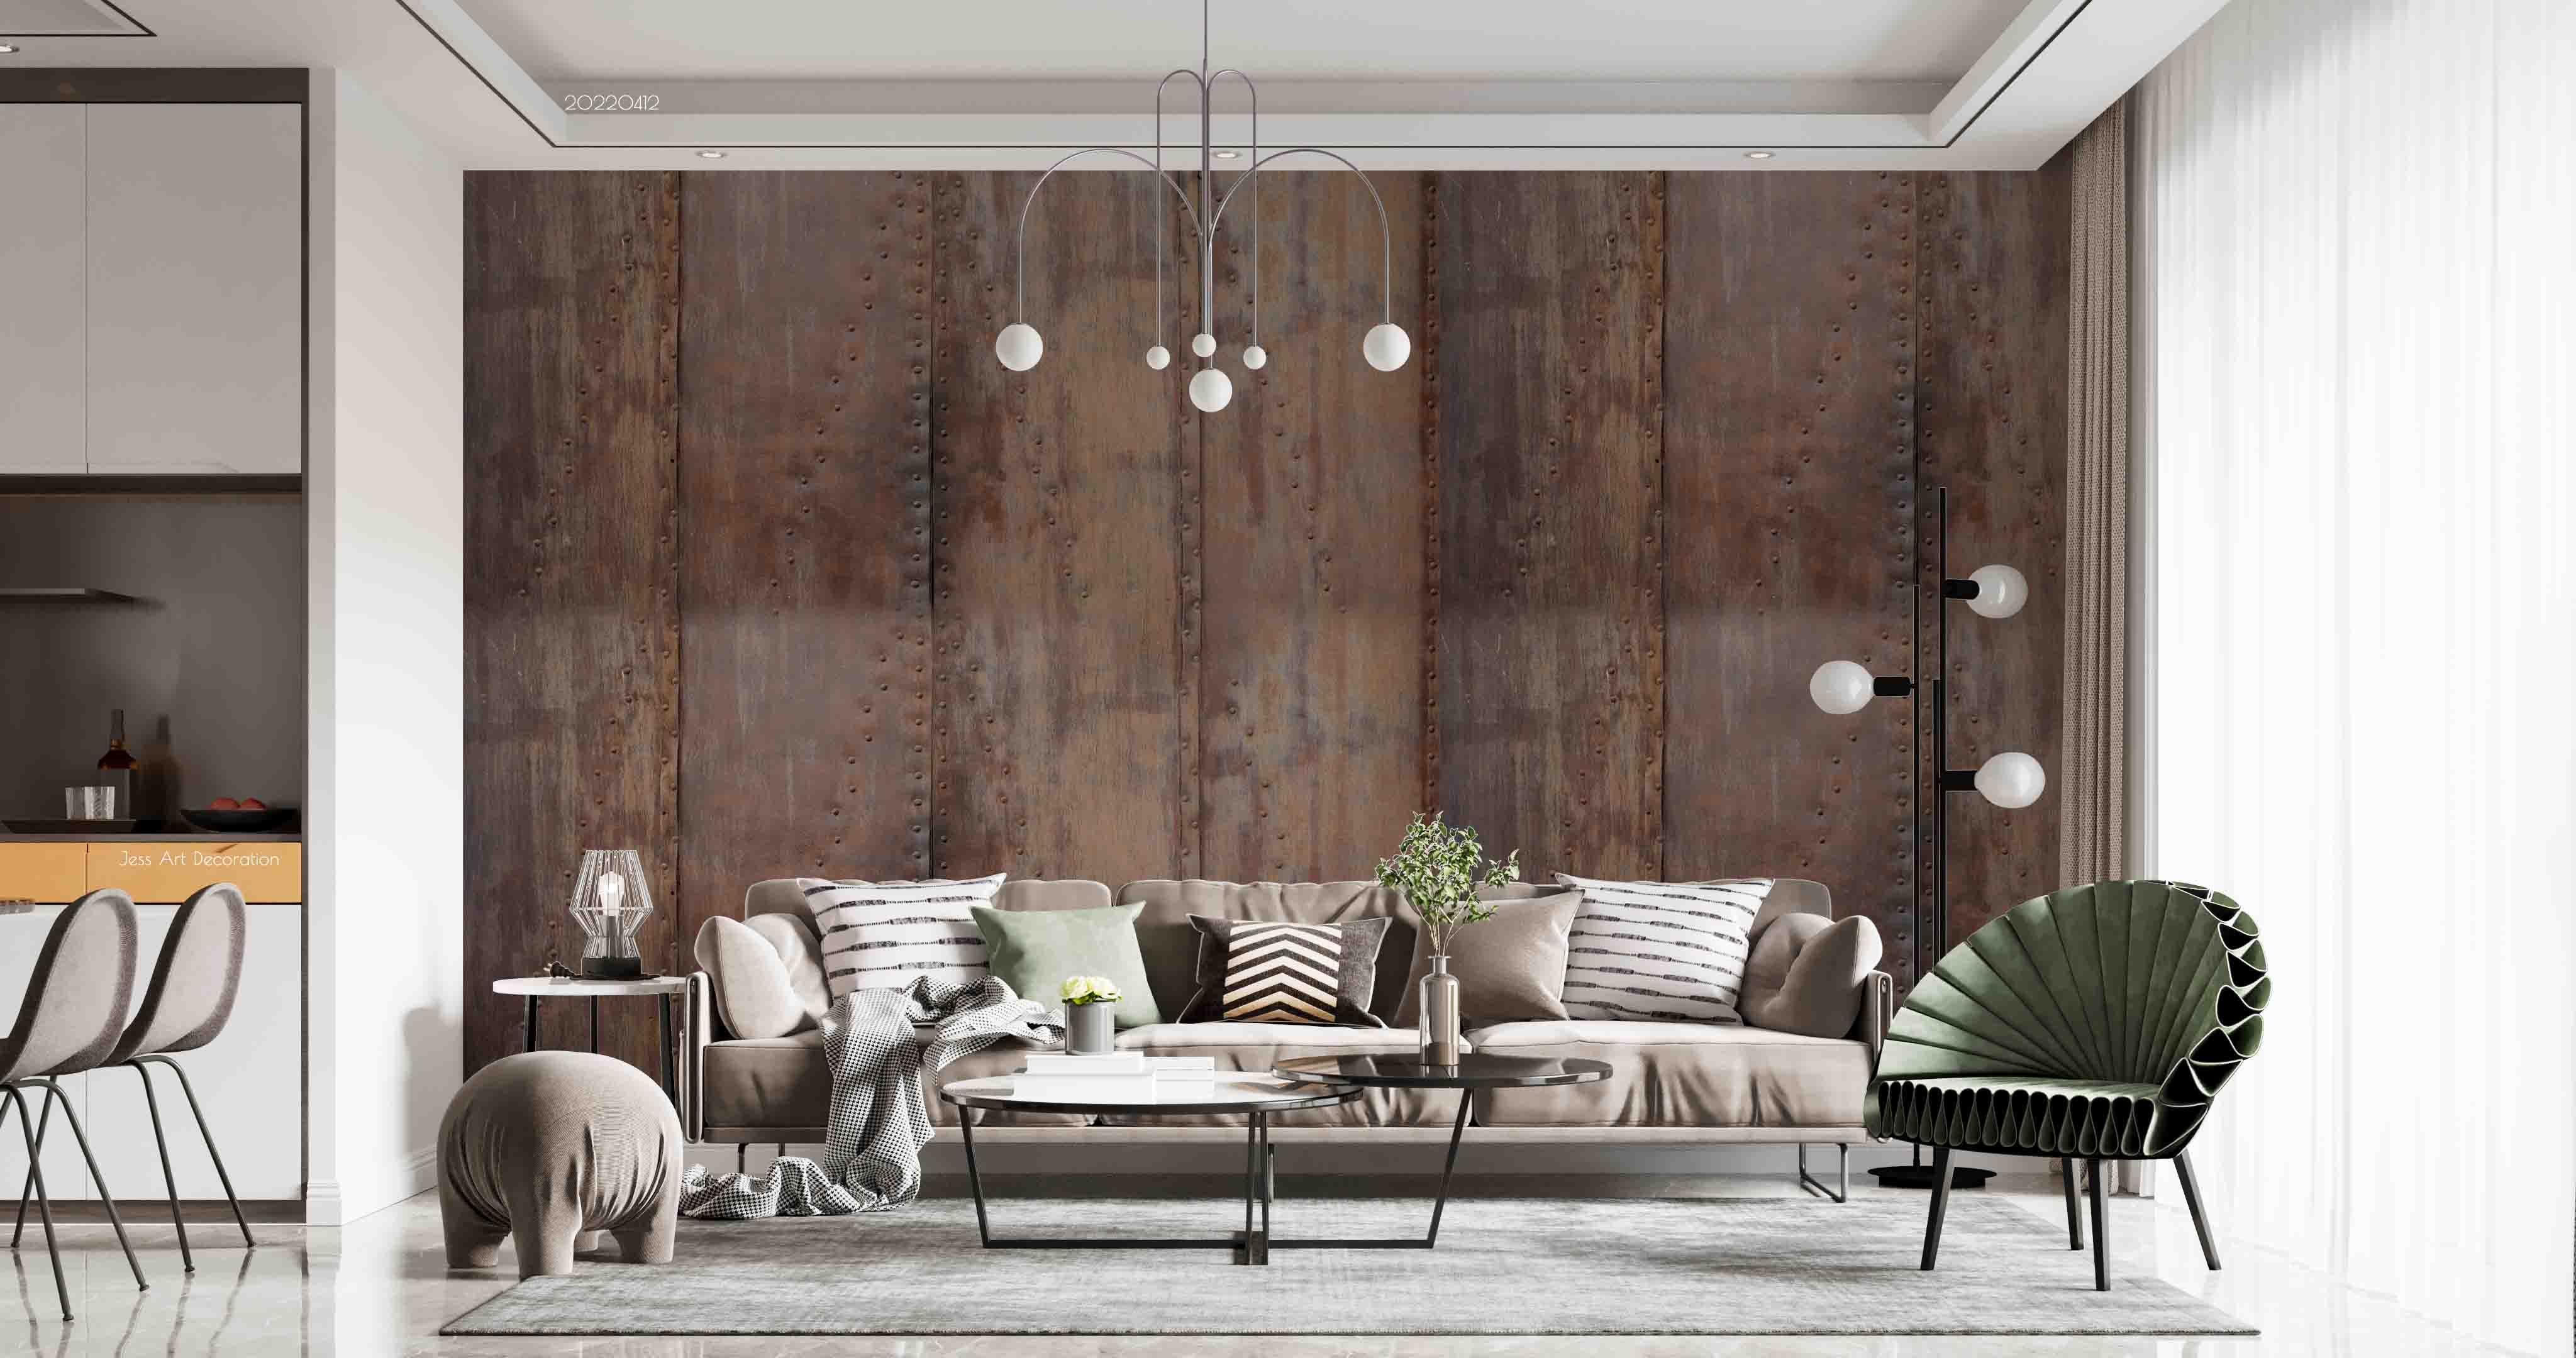 3D Vintage Brown Willows Background Wall Mural Wallpaper GD 3905- Jess Art Decoration